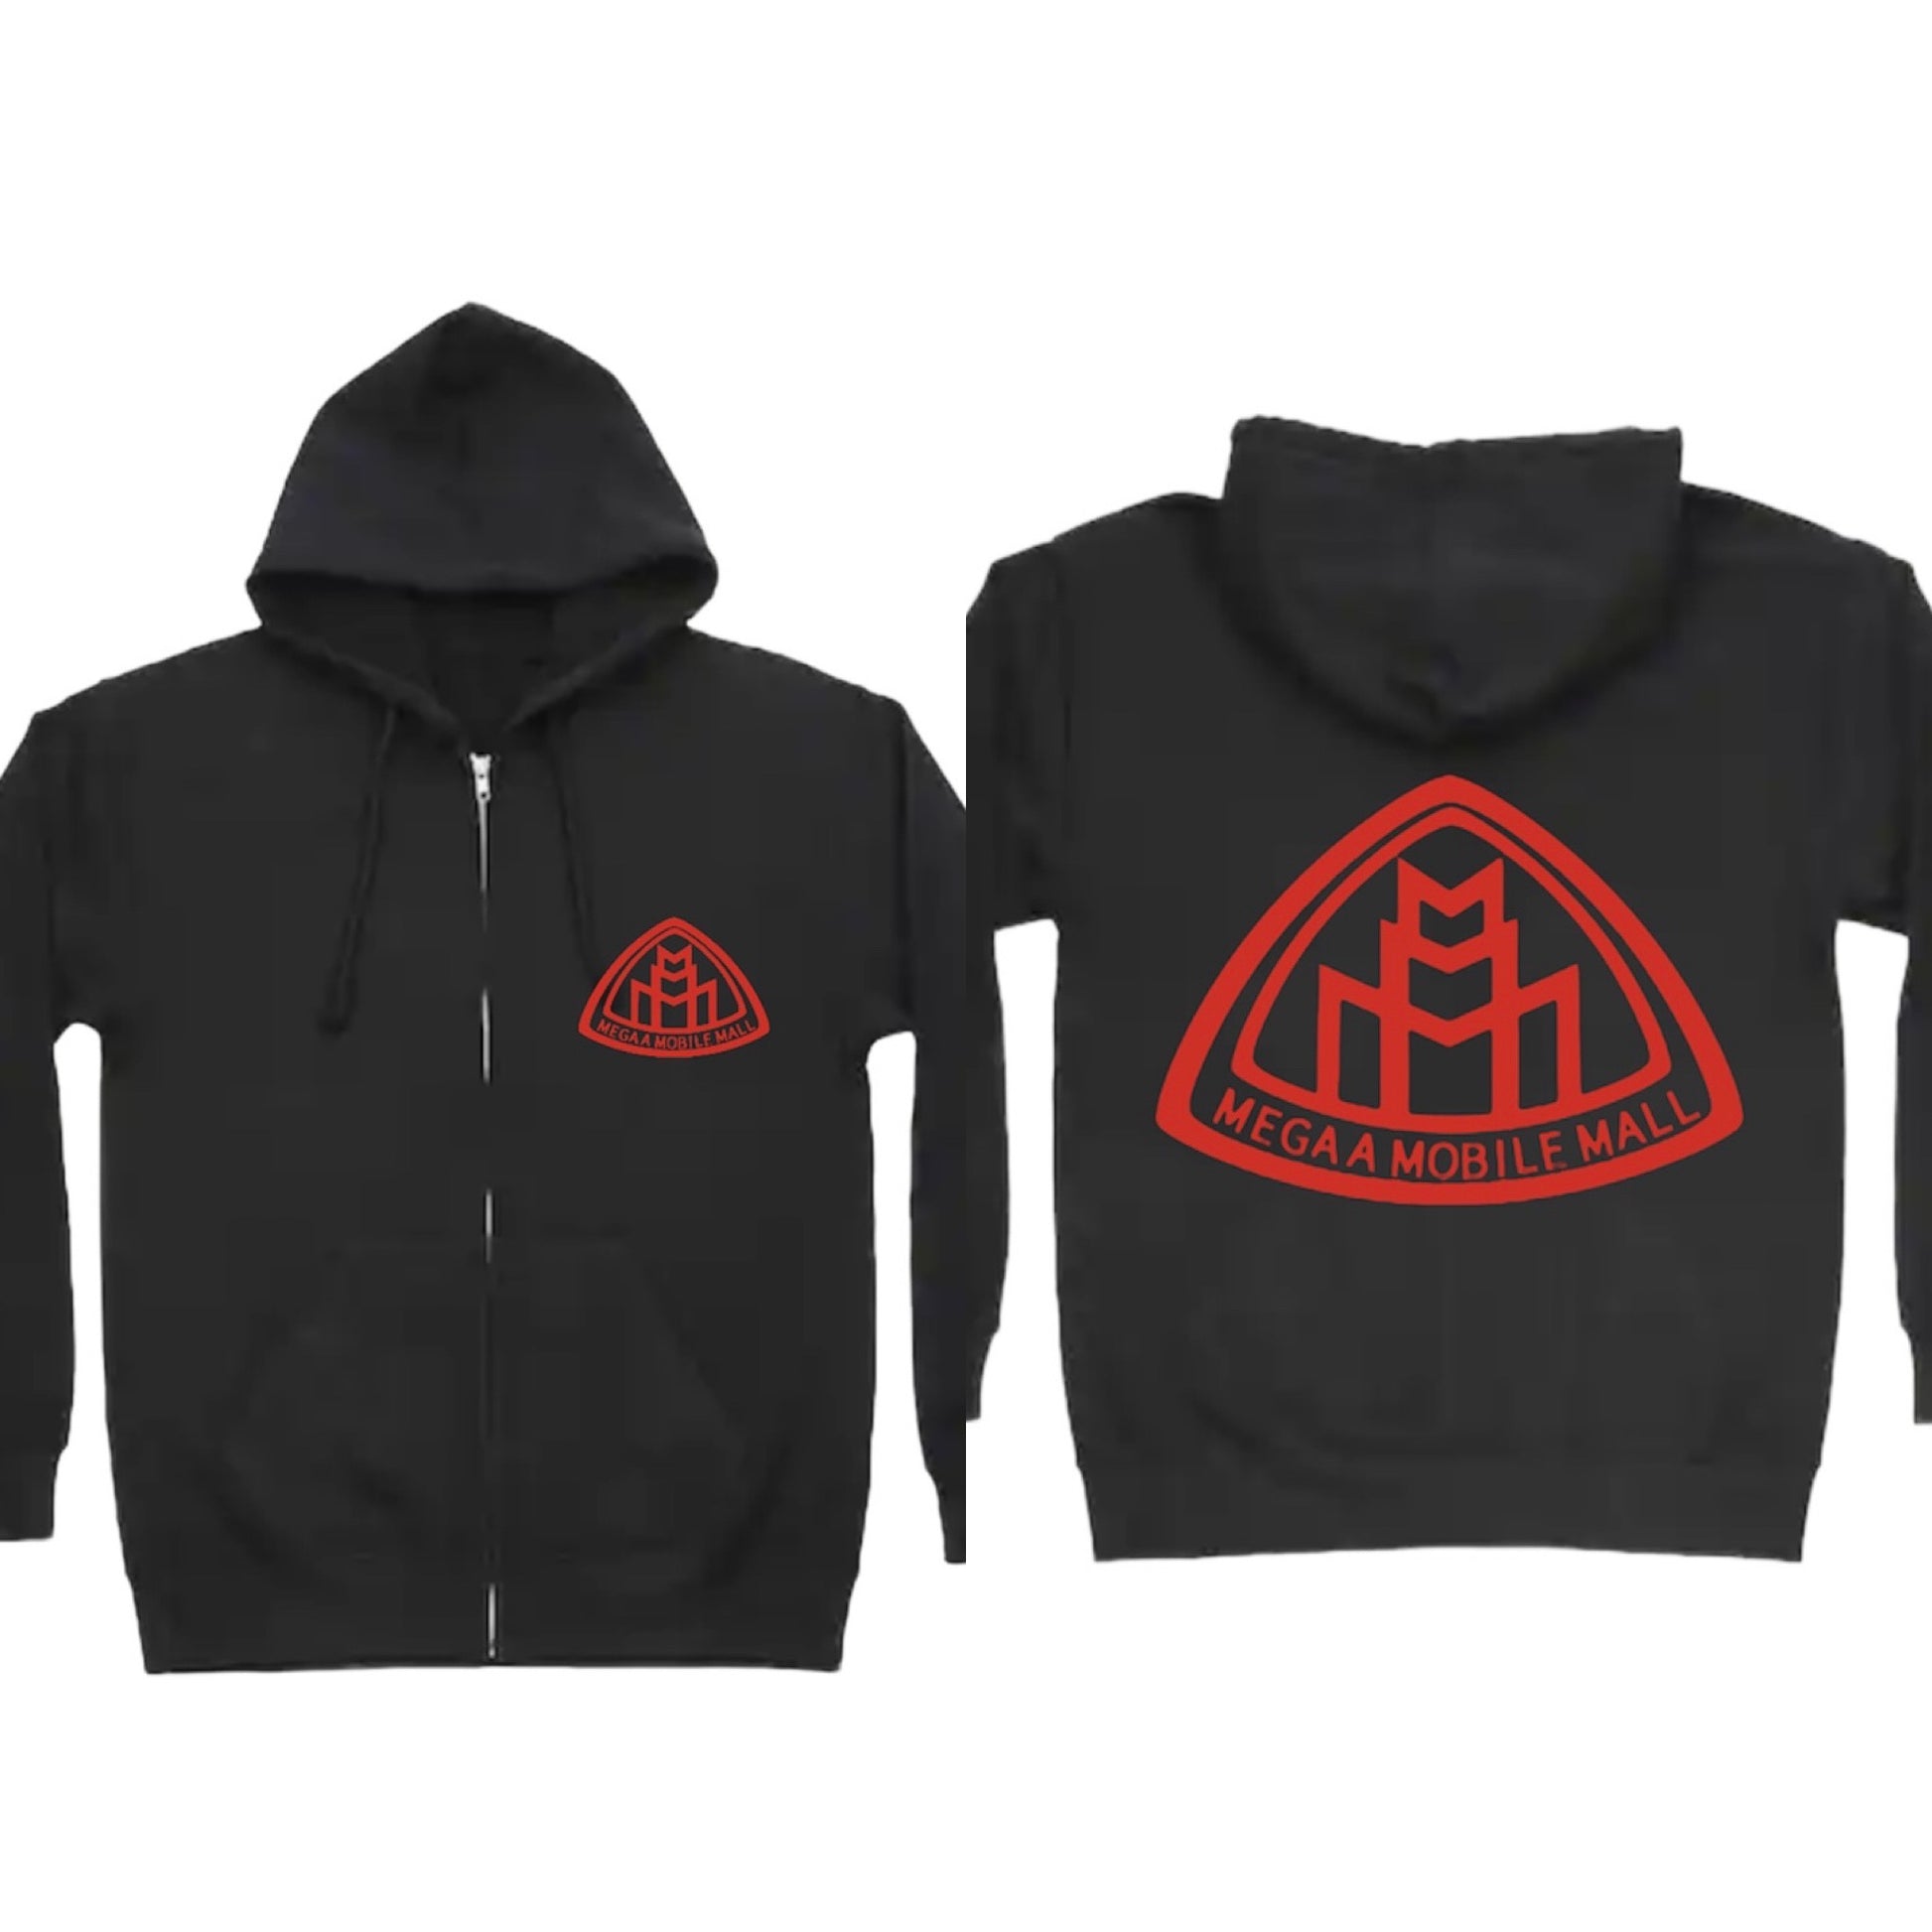 megaamobilemall black zip up hoodie with red logo color